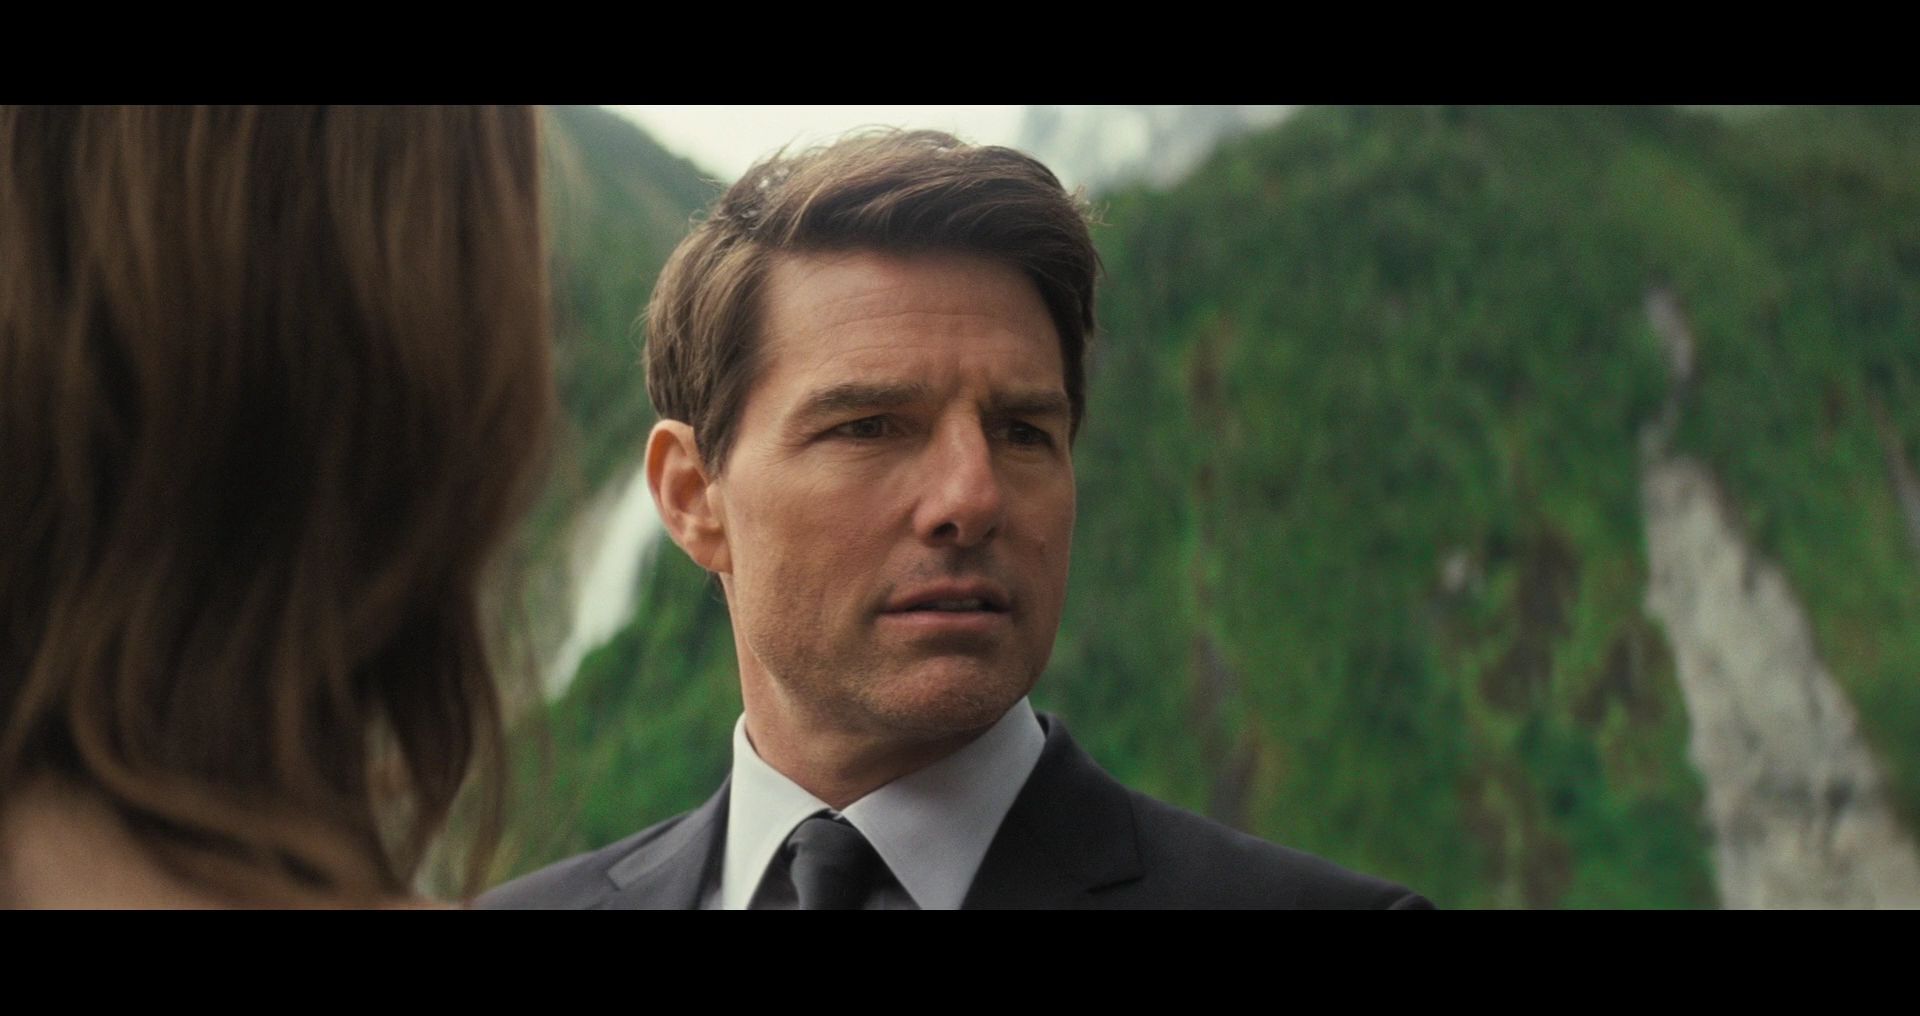 Mission-Impossible-Fallout-0031.jpg